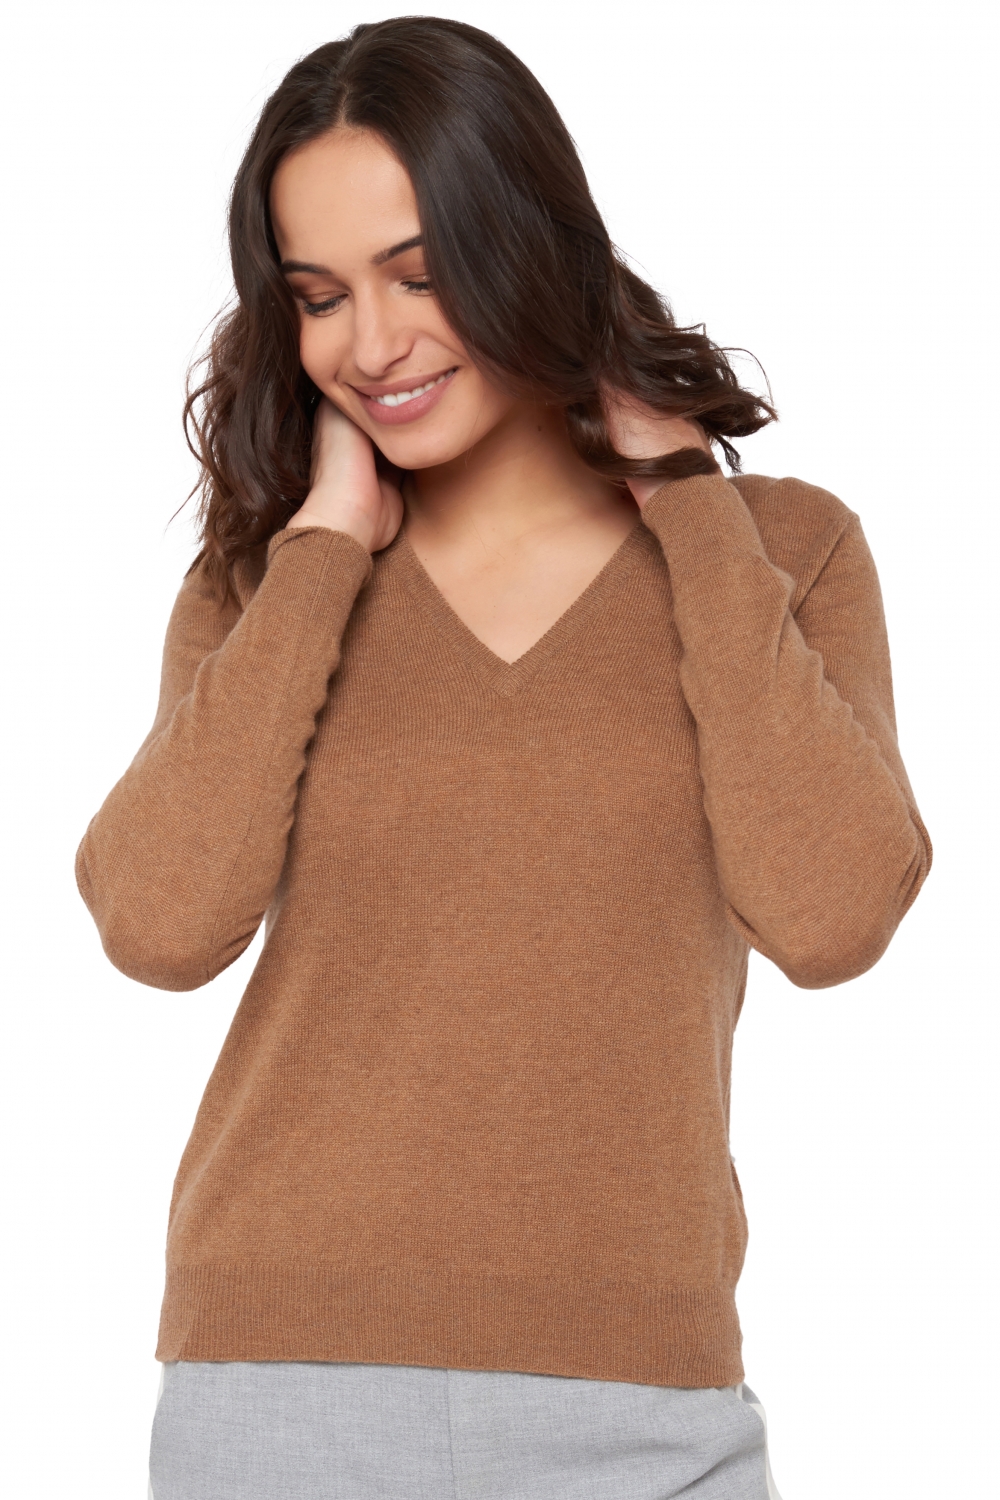 Cachemire pull femme faustine camel chine 2xl